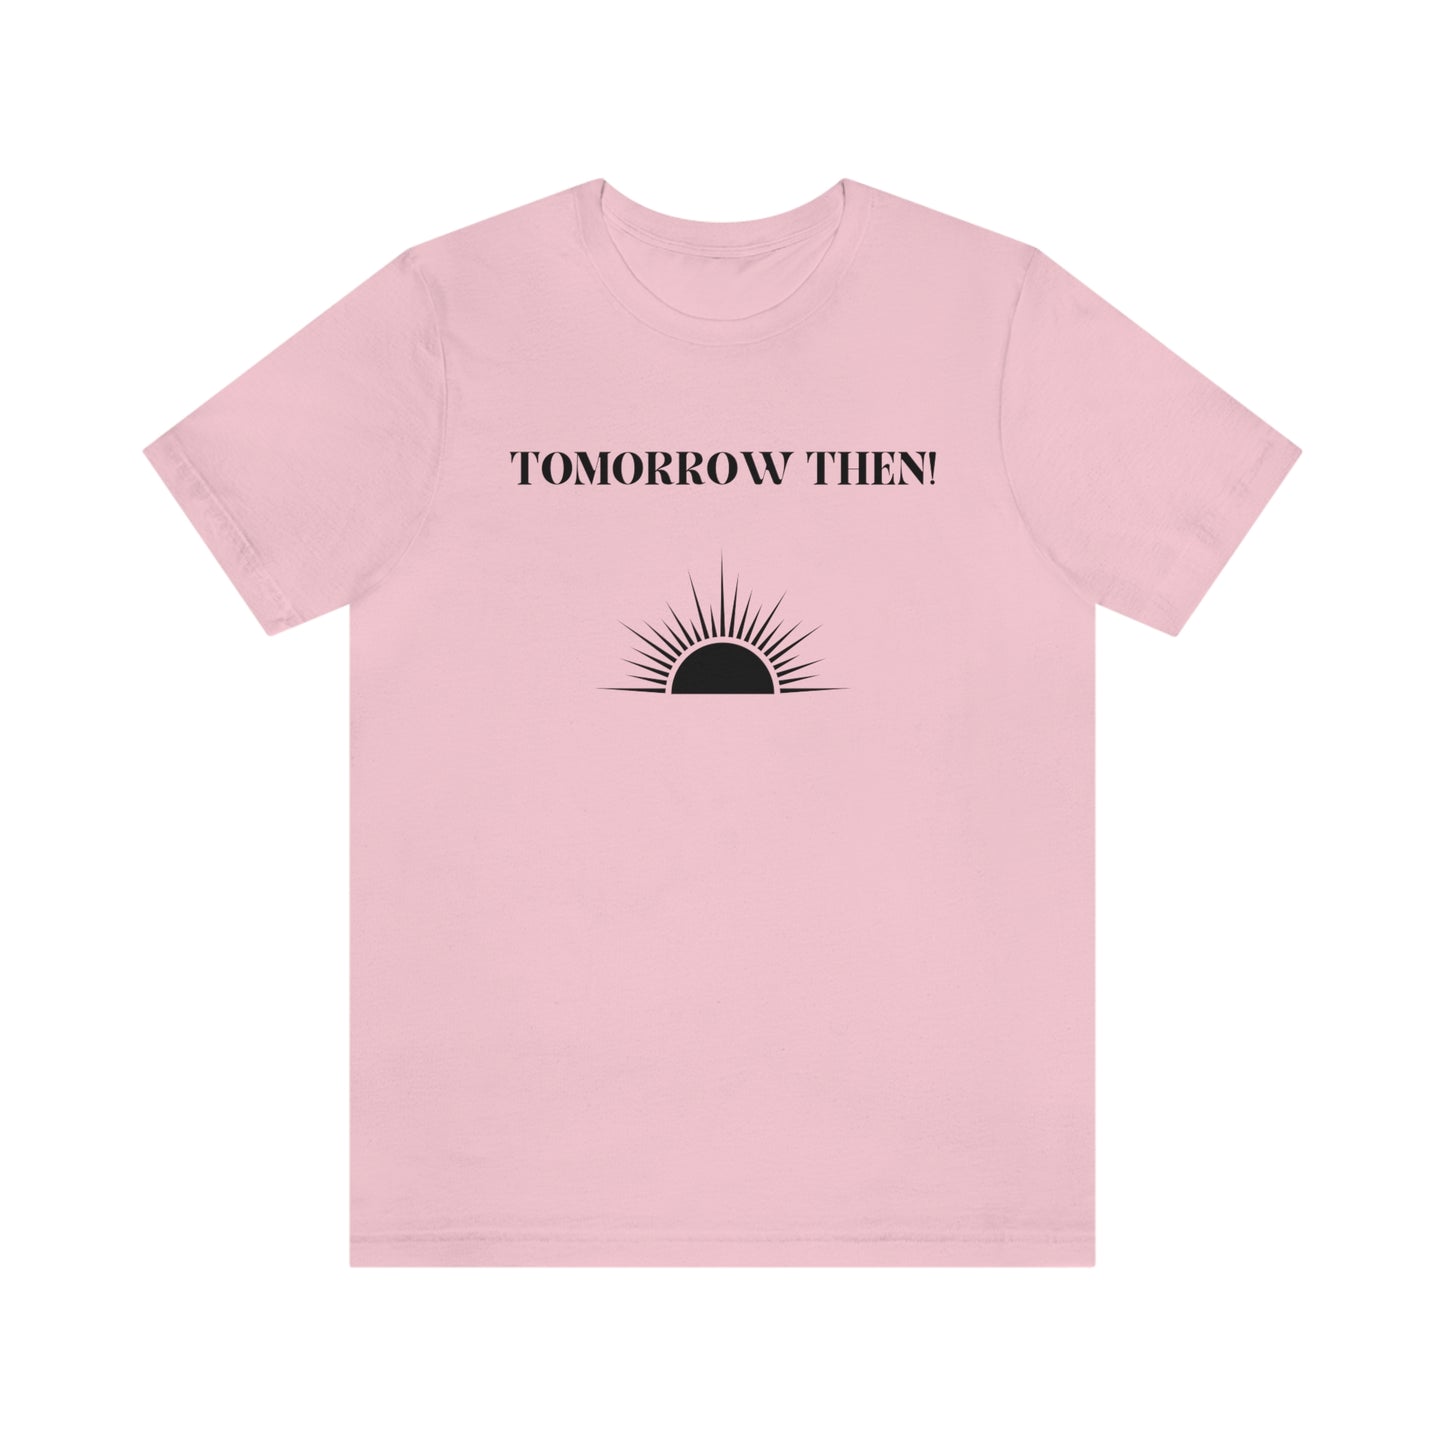 Tomorrow then t shirt, t shirt with inspirational words t shirts to encourage loved ones, tshirt gift for friends ,hopeful affirmations